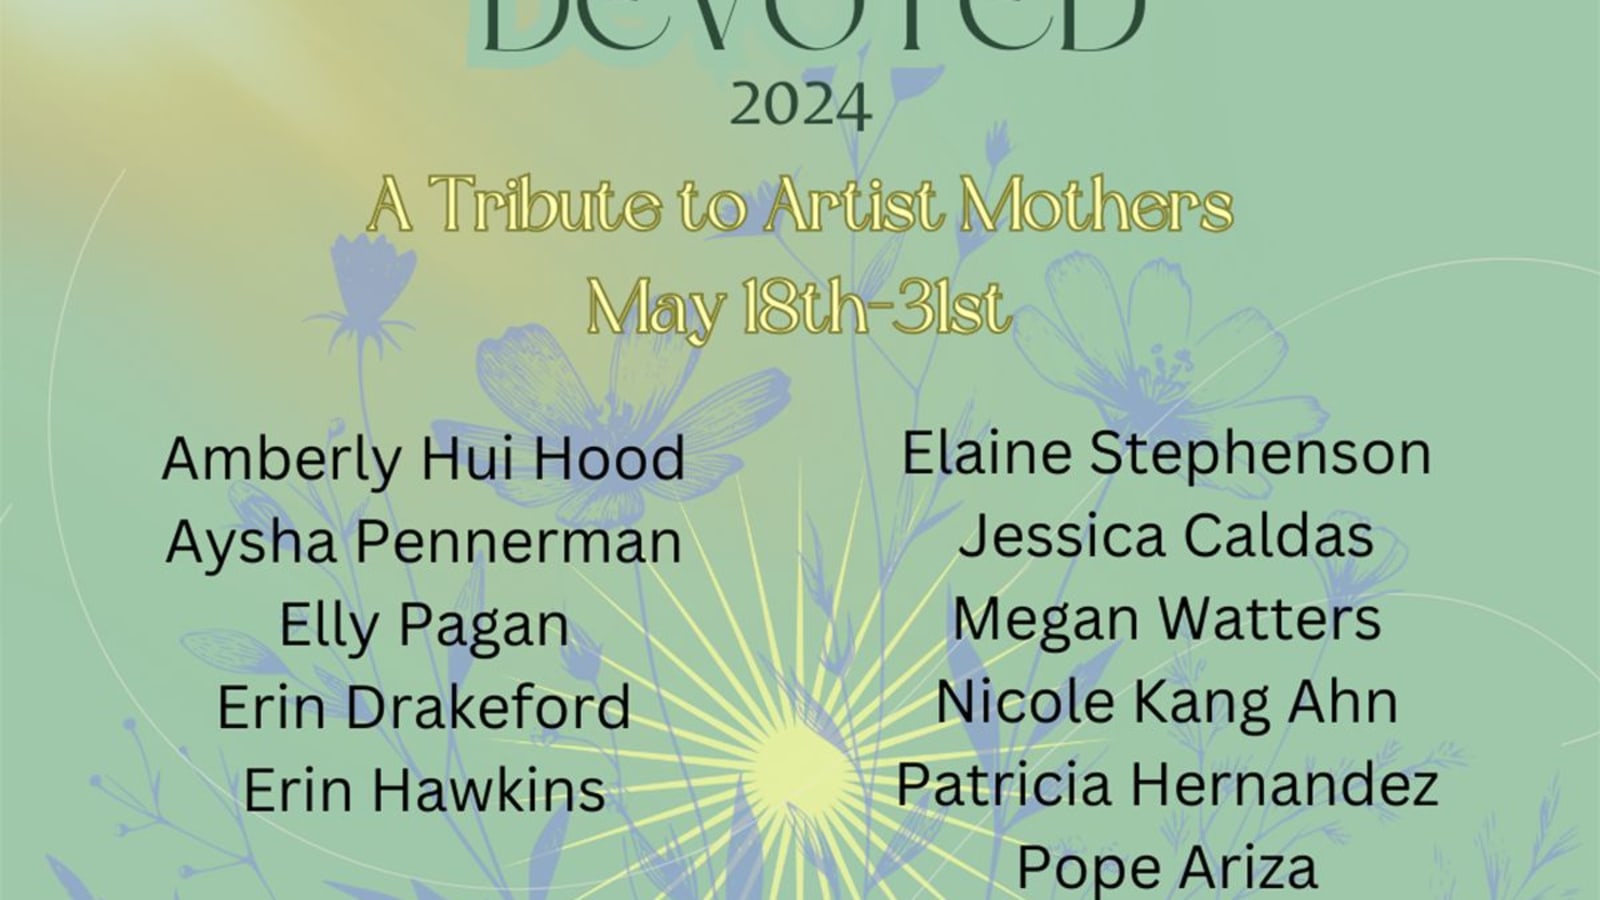 Devoted 2024 ~ A Tribute to Artist Mothers